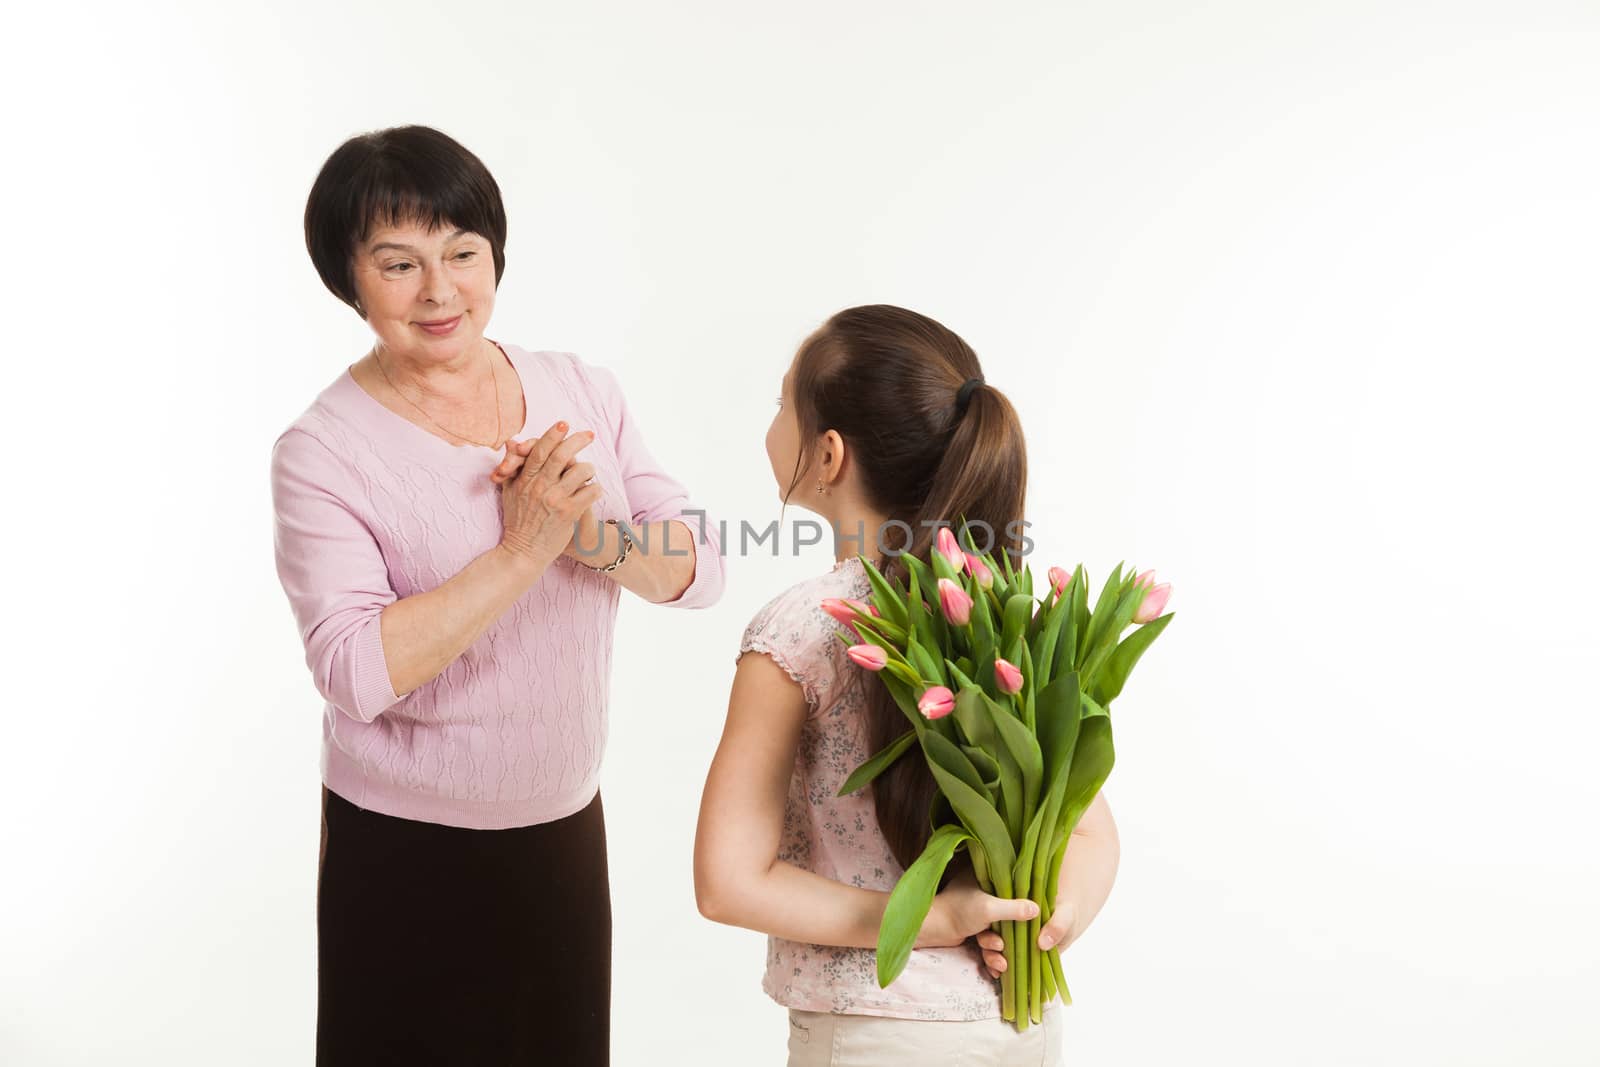 the granddaughter hides a bouquet of flowers for the grandmother behind the back